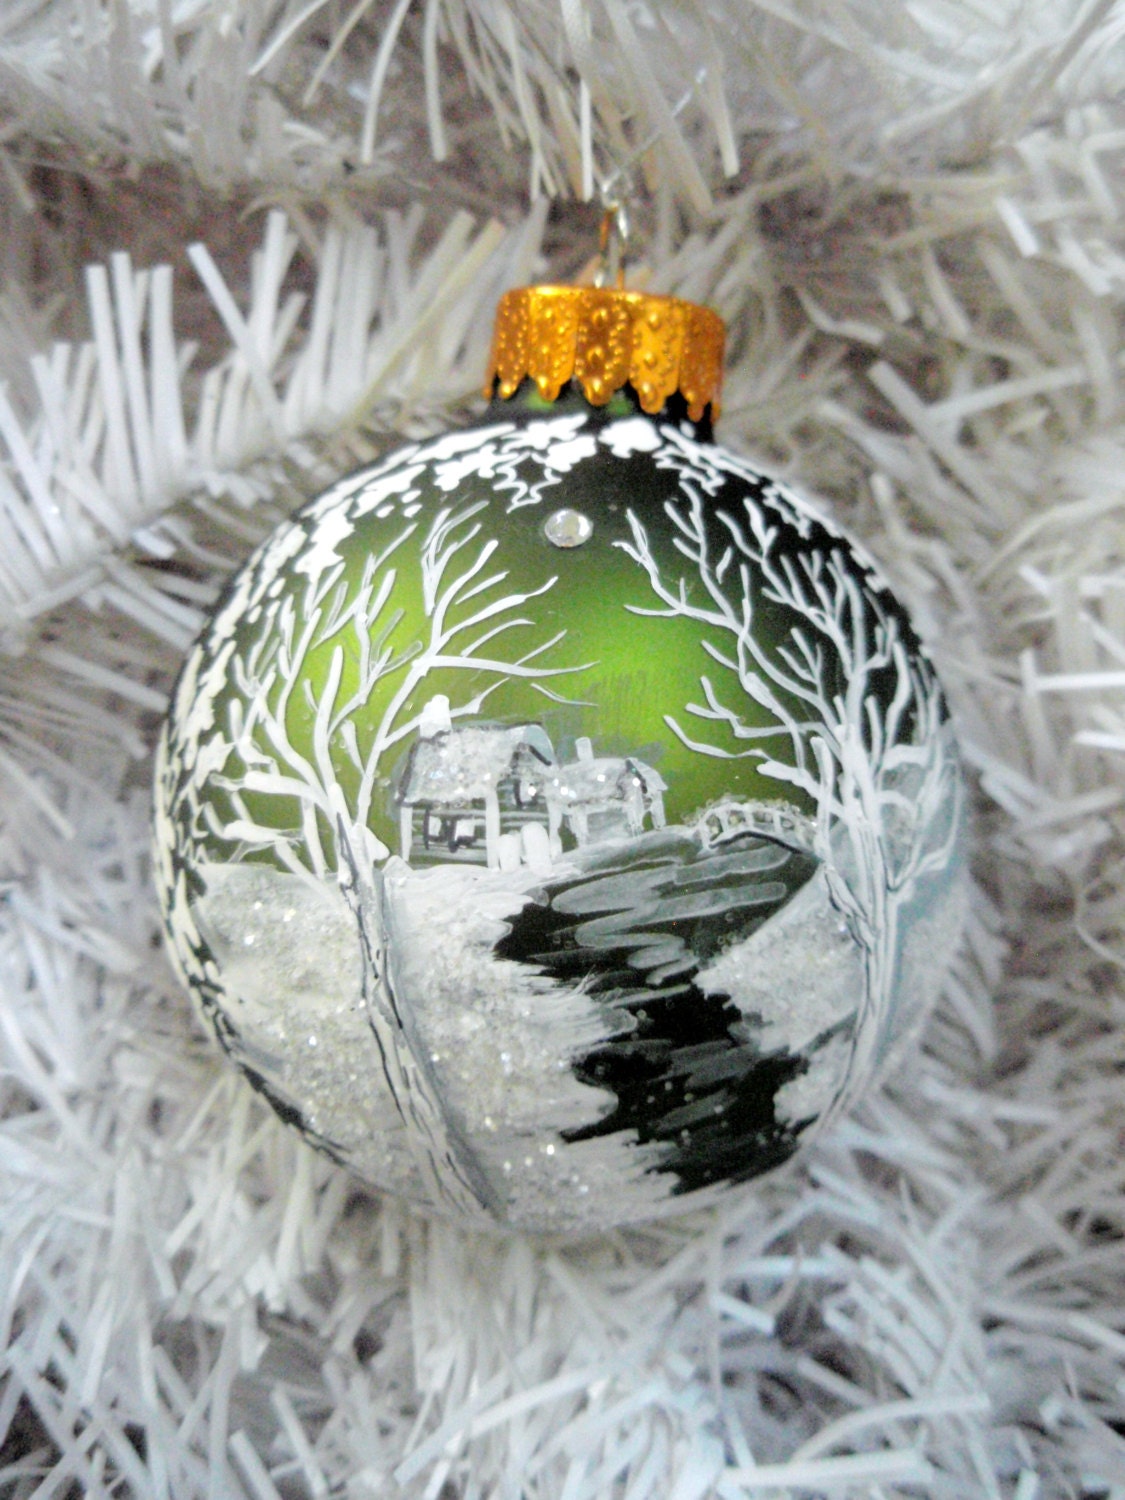 Personalized Painted Christmas Ball- Meandering Creek Snow Cabin by River, White Winter Landscape Handpainted Moss Green Glass Ball Ornament - PickleLilyDesign